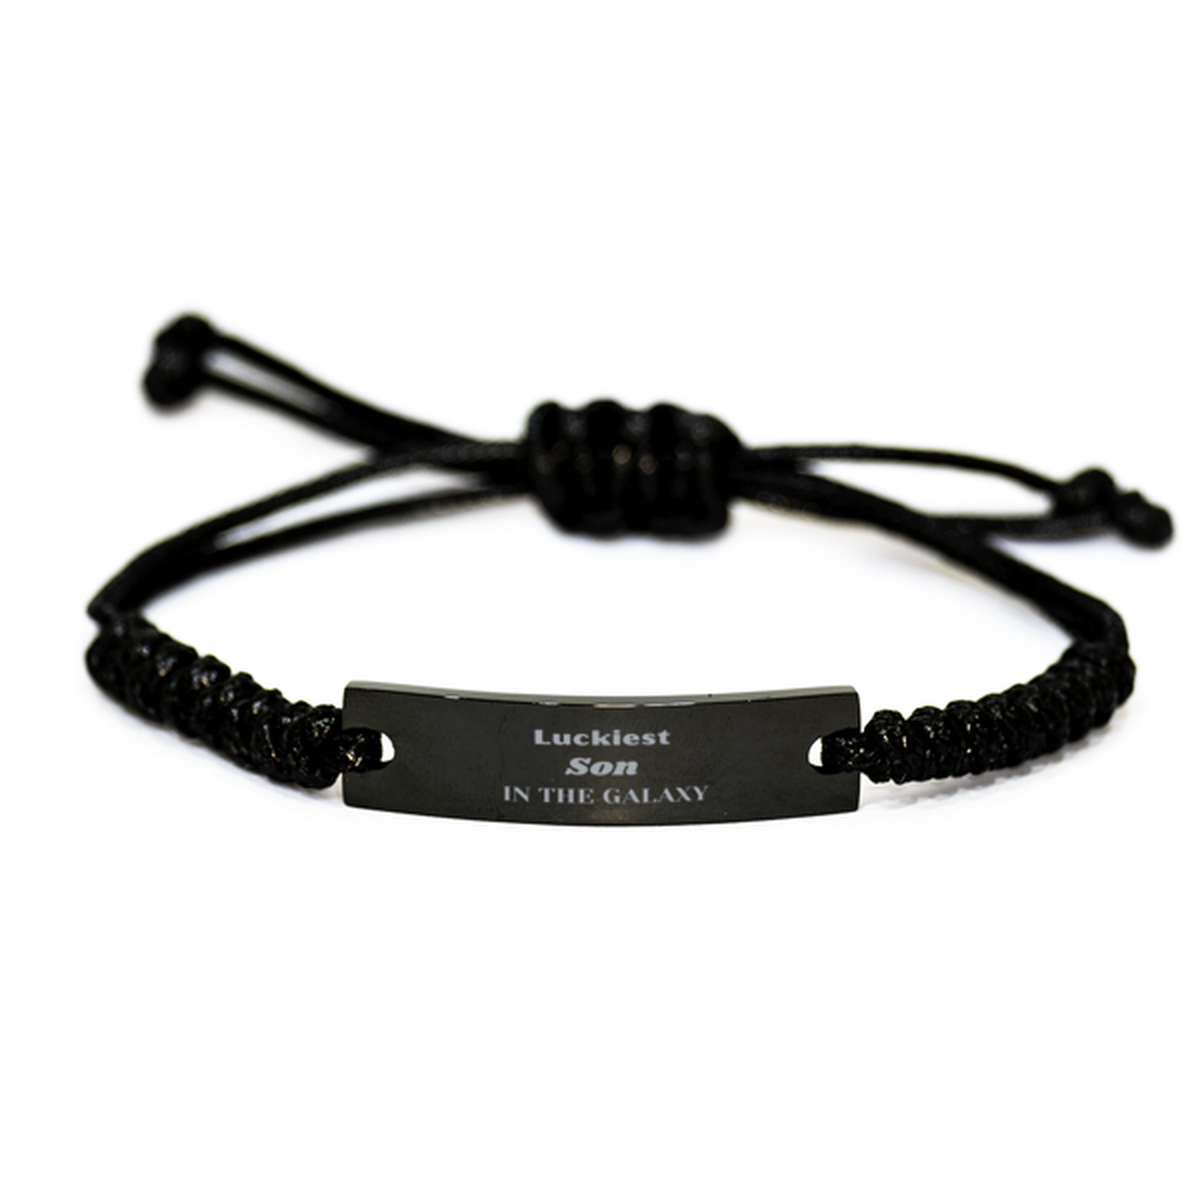 Luckiest Son in the Galaxy, To My Son Engraved Gifts, Christmas Son Black Rope Bracelet Gifts, X-mas Birthday Unique Gifts For Son Men Women